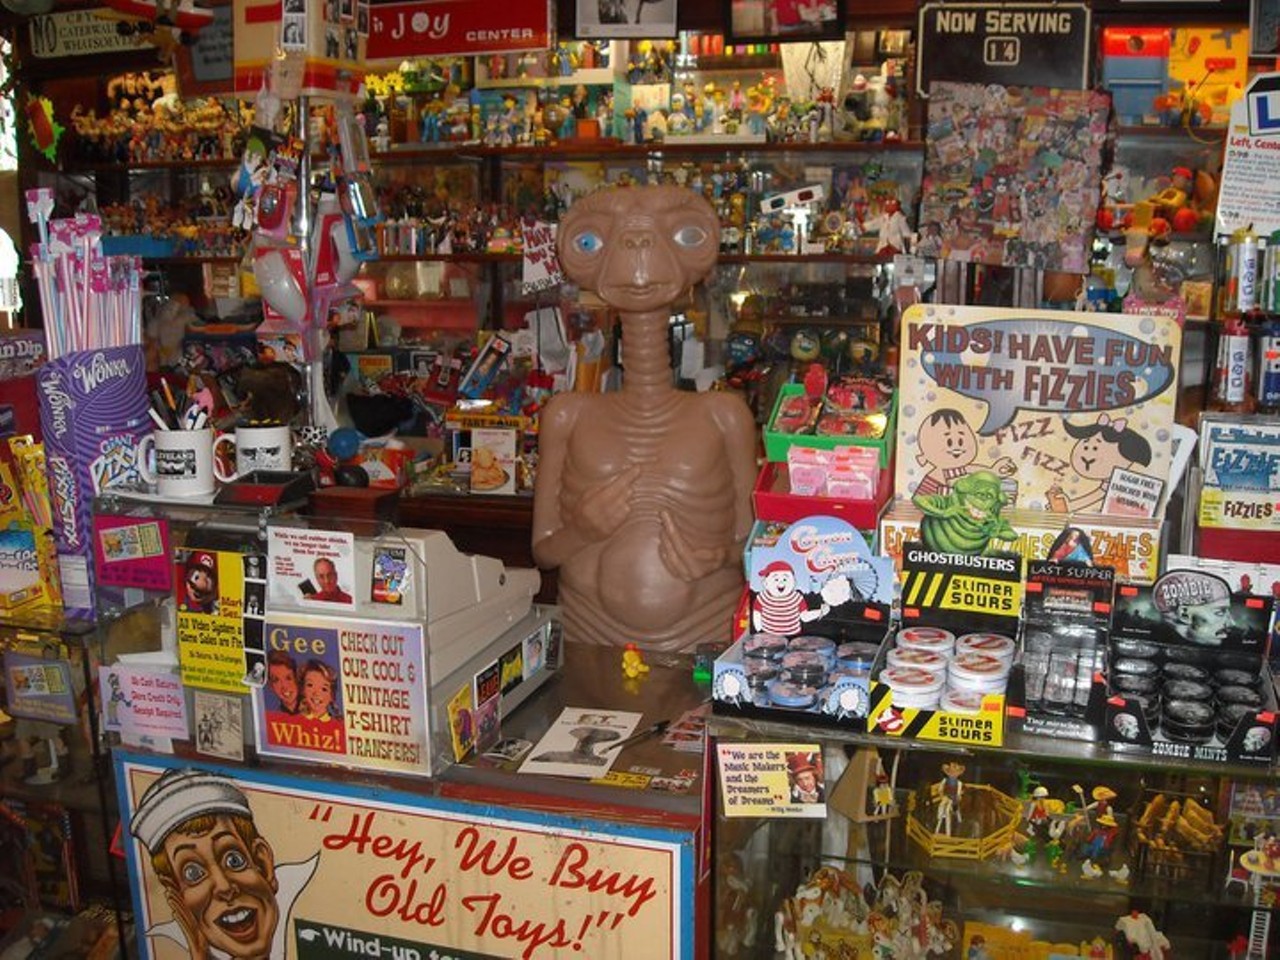  Big Fun
1827 Coventry Rd., Cleveland
After a 27 year run, the beloved toy and joke store's Cleveland shop closed in 2018. (The Columbus location is, however, still very much alive.) Big Fun regularly won the "Best Toy Store" category in Scene's annual Best Of issue for good reason. Located in Cleveland Heights’ Coventry neighborhood, the independent store stocked a slew of hard-to-find toys from both the past and present. If you were looking for Star Wars, Transformers and G.I. Joe figurines, the place had you covered, because it was basically a toy museum. And it wasn't just a local favorite. Playboy once named Big Fun one of the “coolest stores” in America. A satellite store was opened in Pinecrest at one point but it is now closed.